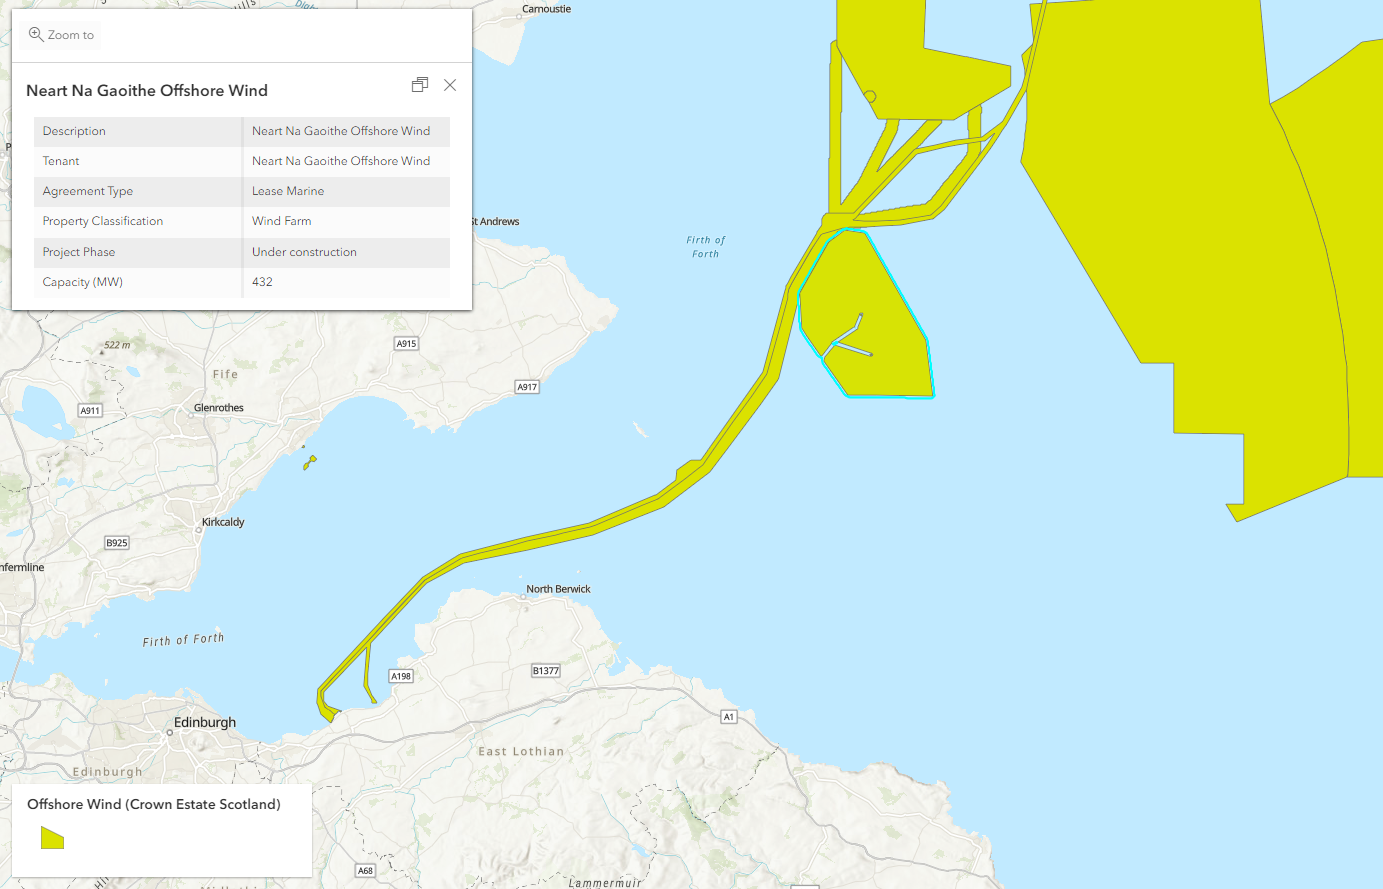 Offshore wind assets in Scottish waters from Crown Estate Scotland.